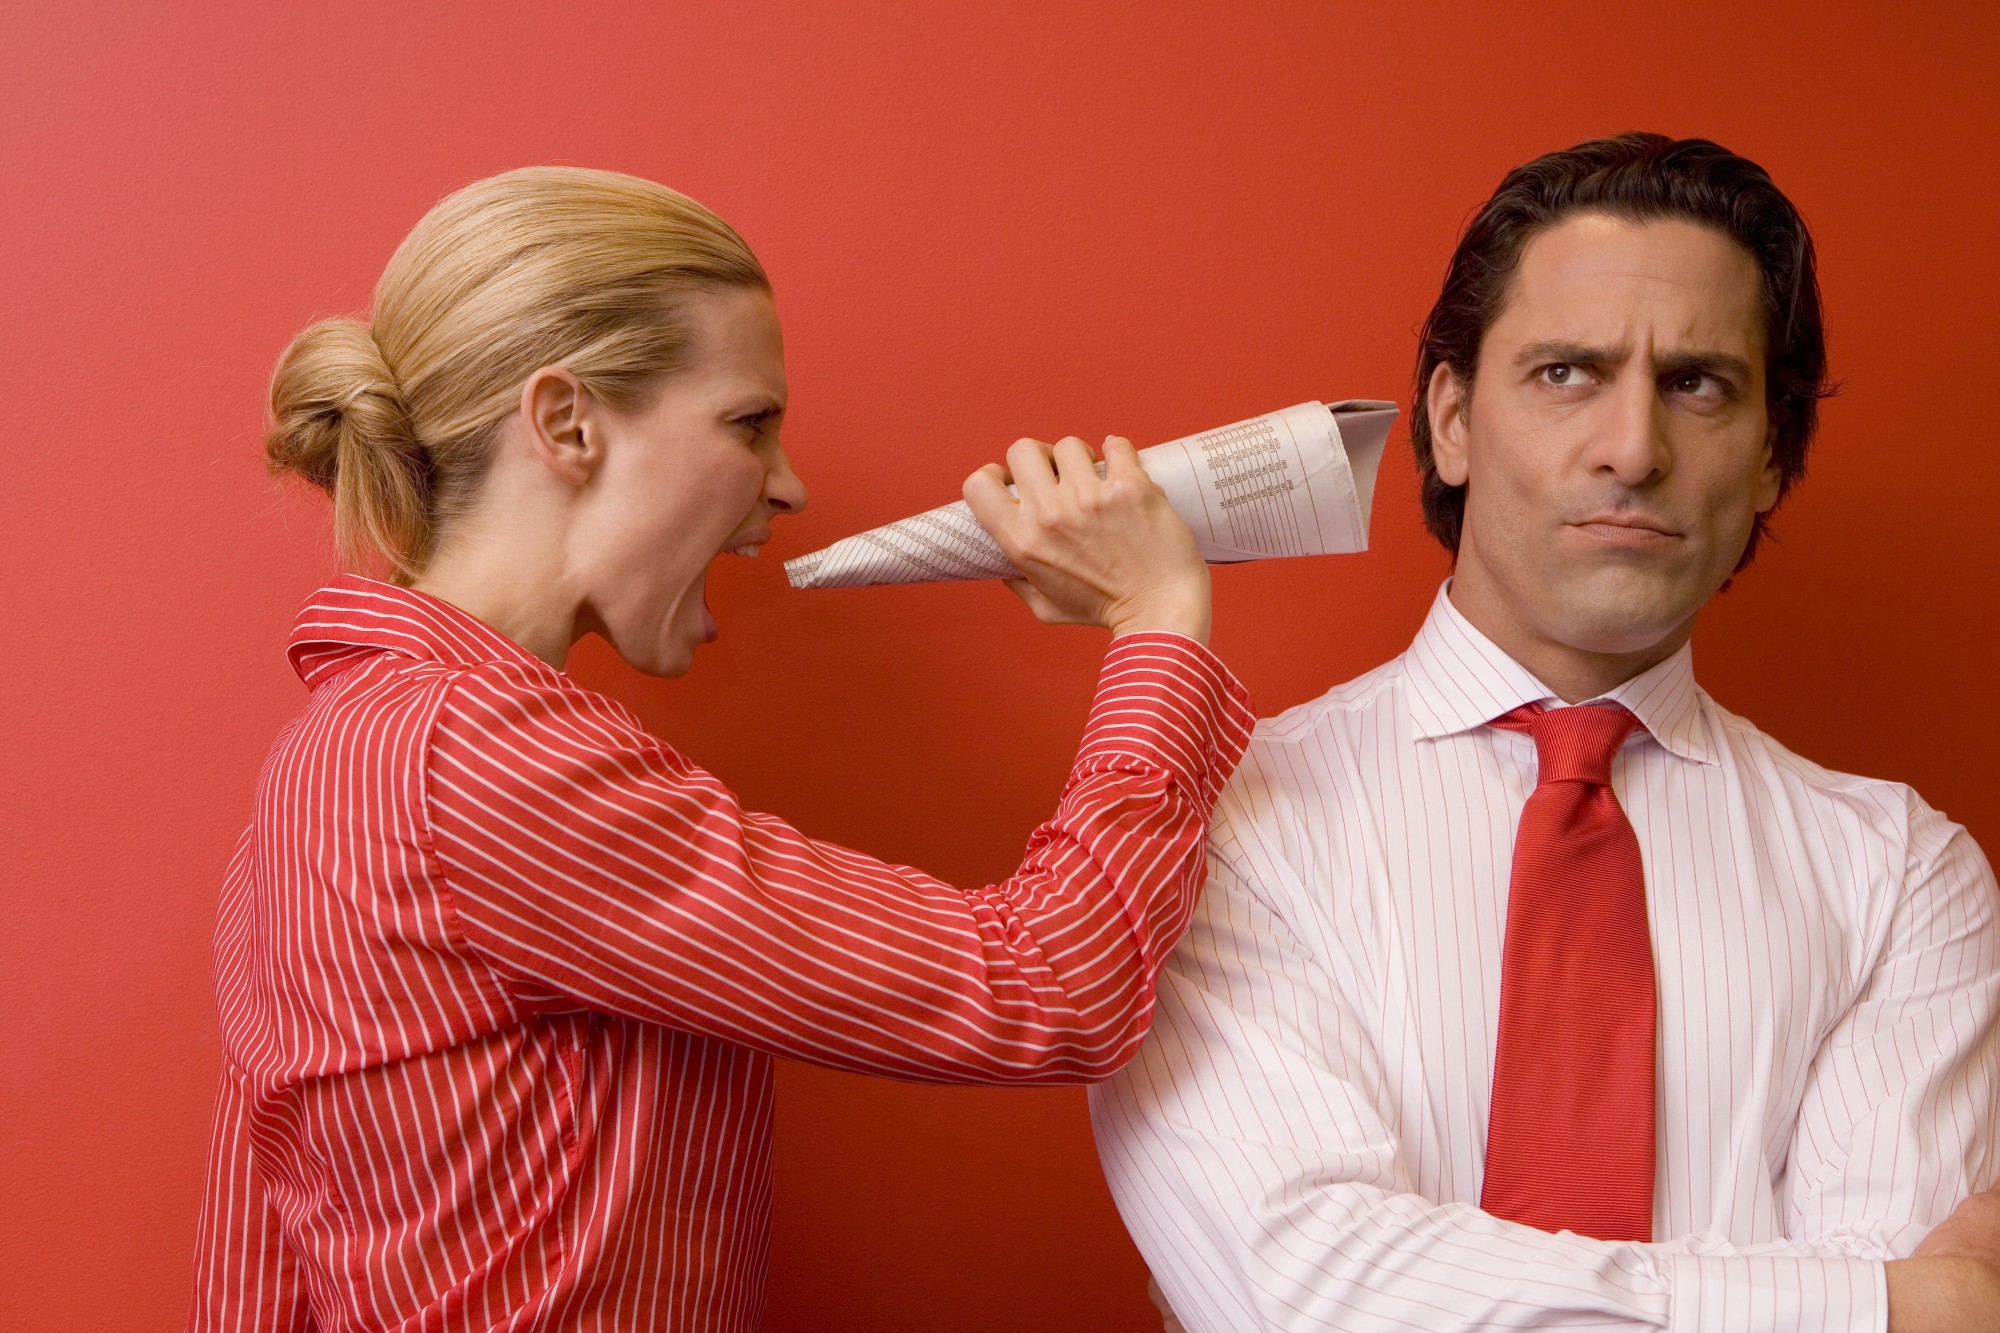 How Well Do You Handle Stress? Annoying coworkers yelling